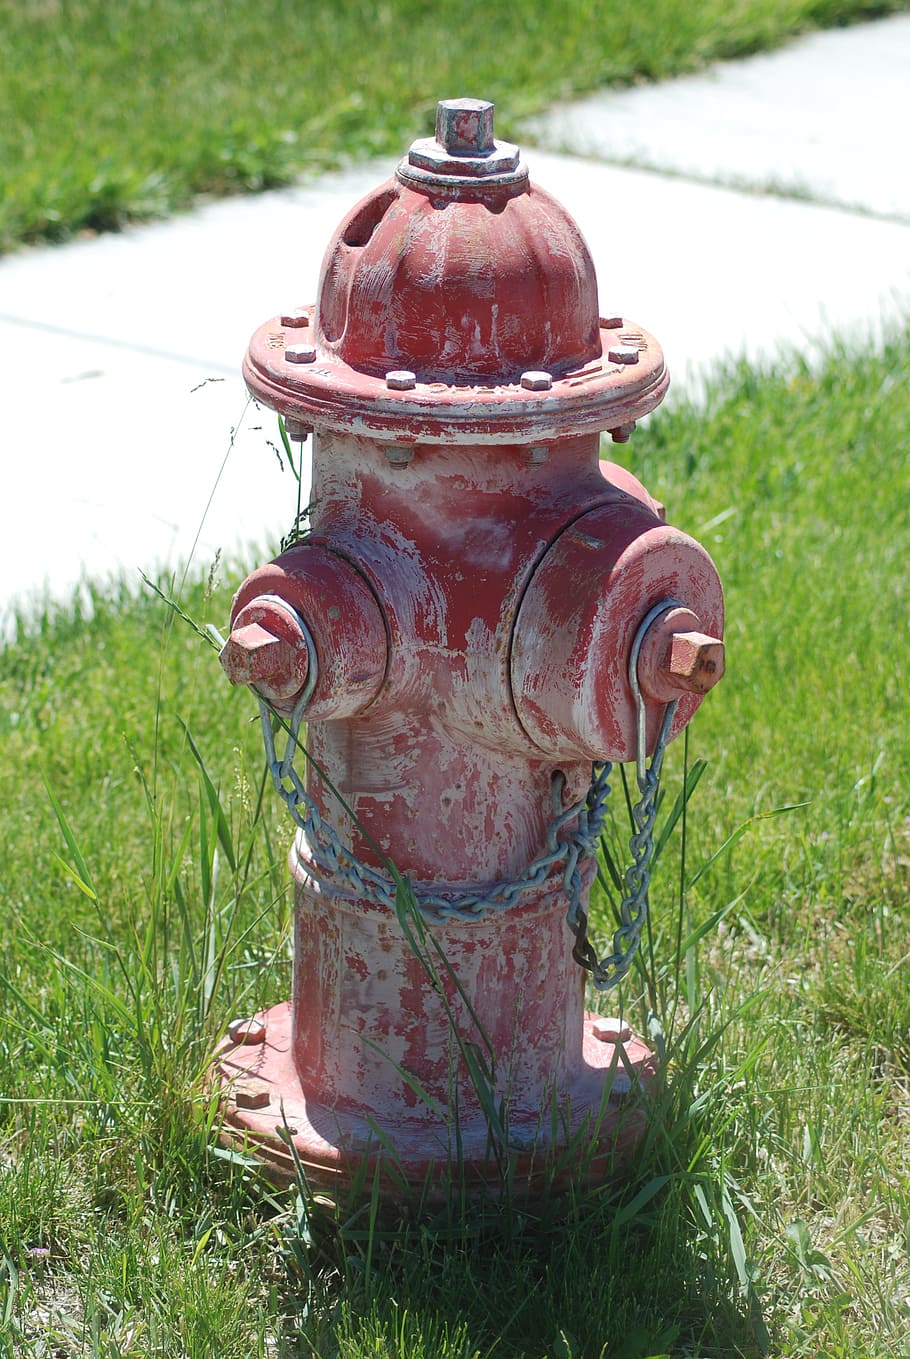 hydrant, fire hydrant, red, water, extinguish, grass, plant, field, day, metal